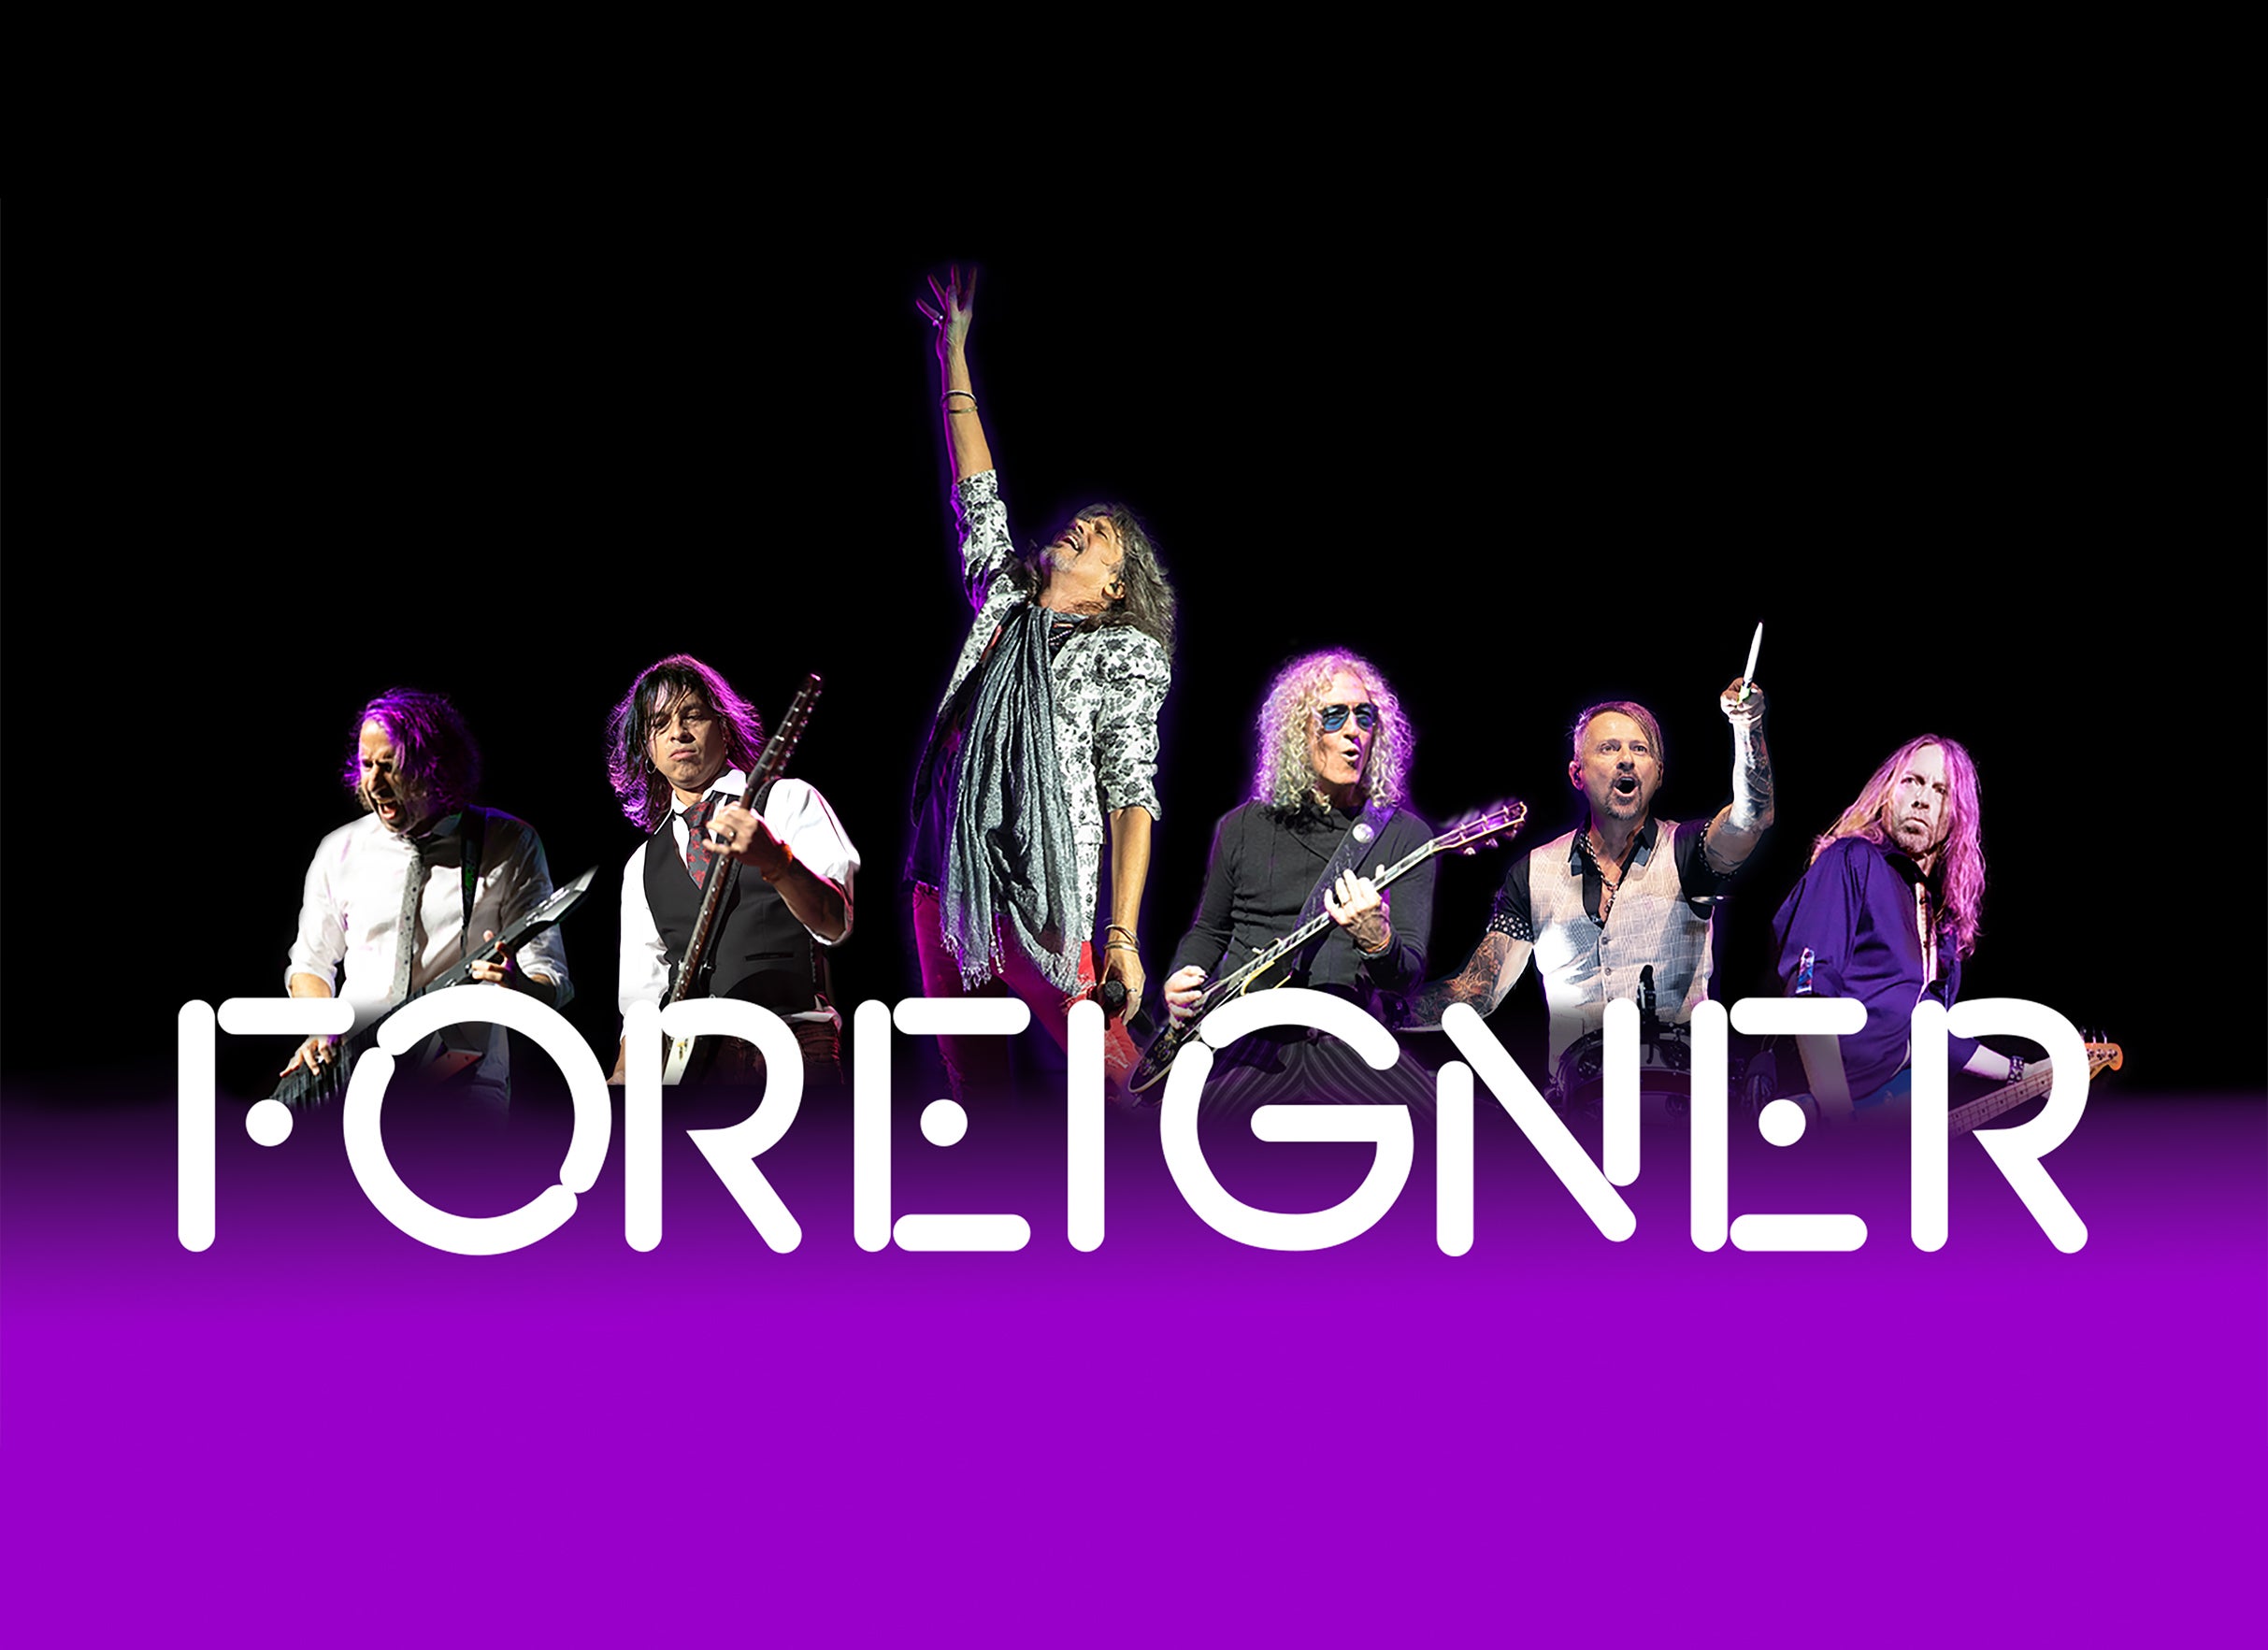 Foreigner: Feels Like the Last Time Farewell Tour in Las Vegas promo photo for VIP Package presale offer code